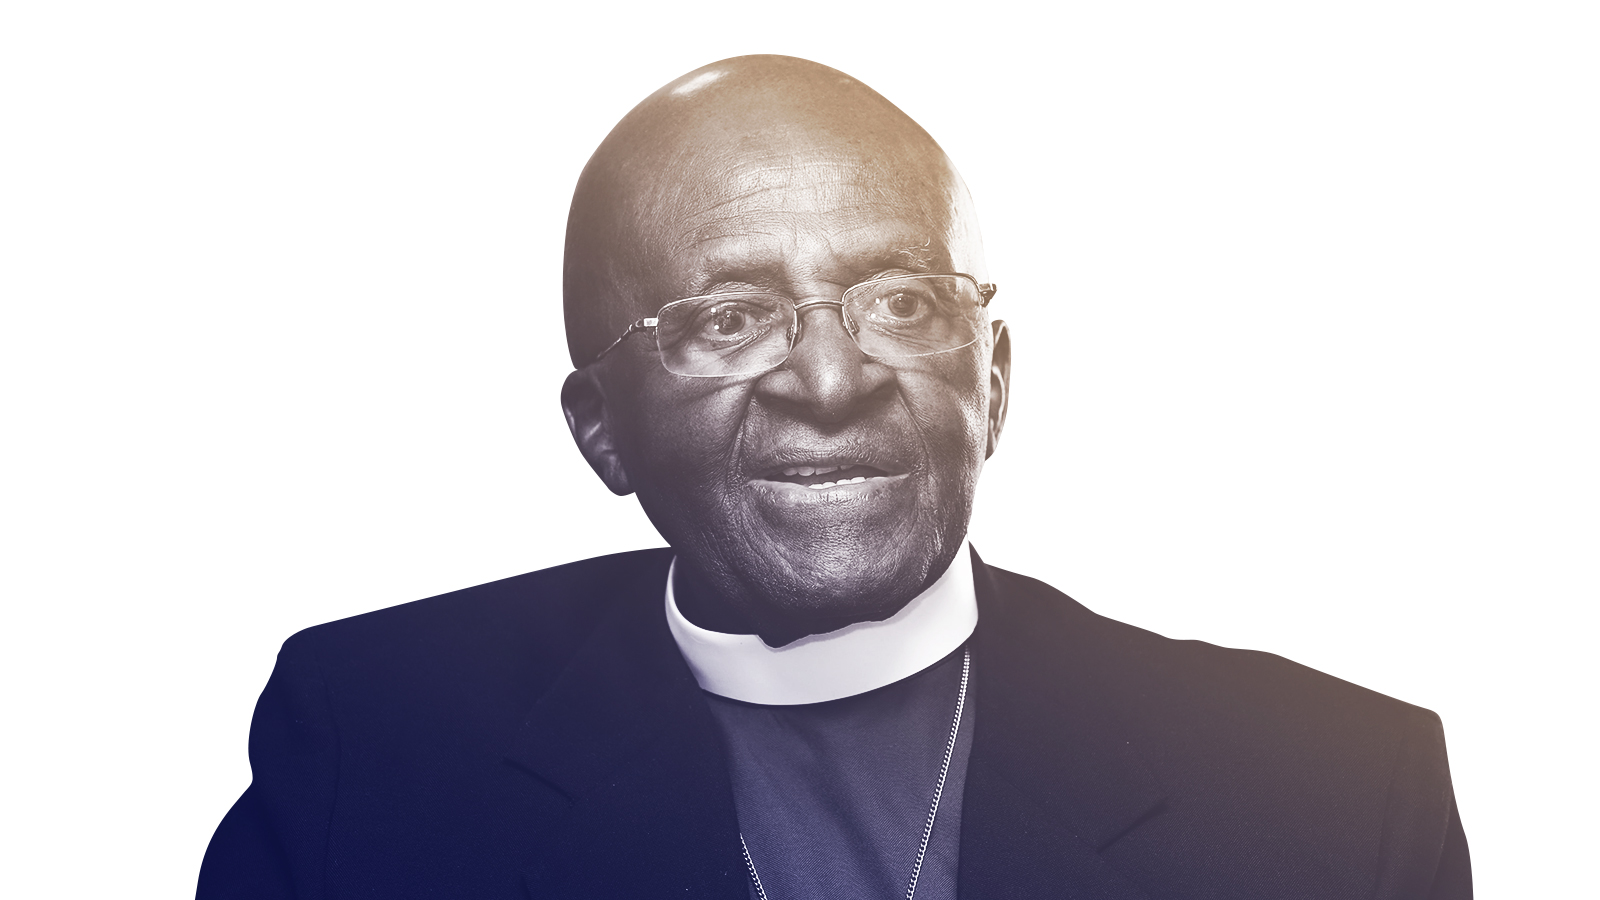 Desmond Tutu: Why The Arch continues to inspire